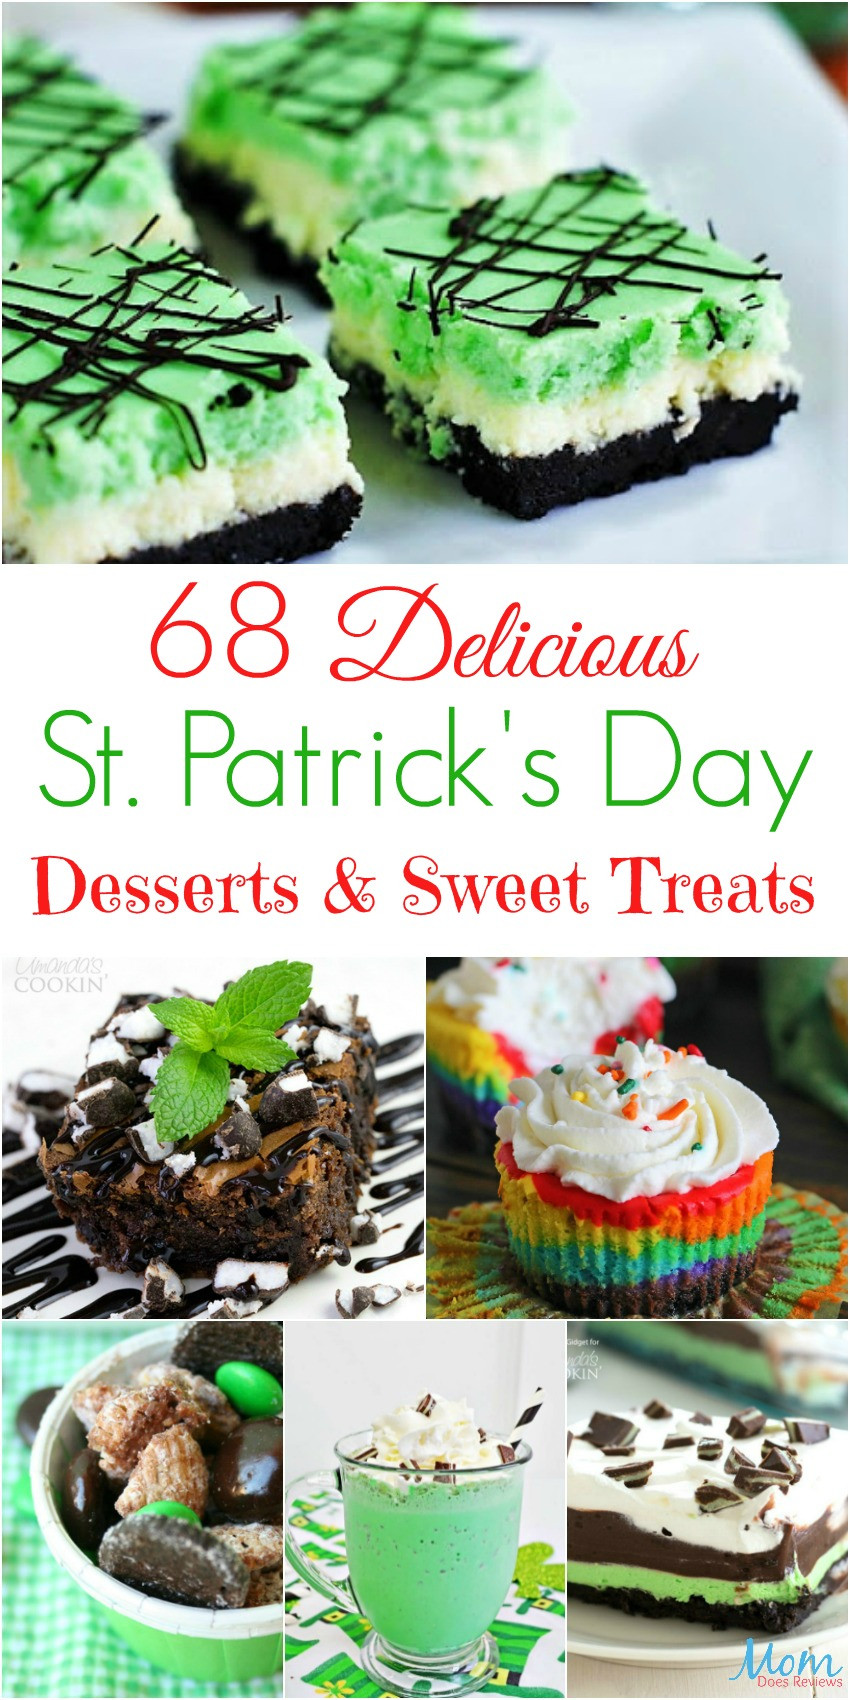 Desserts For St Patrick'S Day
 68 Delicious St Patrick s Day Desserts & Sweet Treats